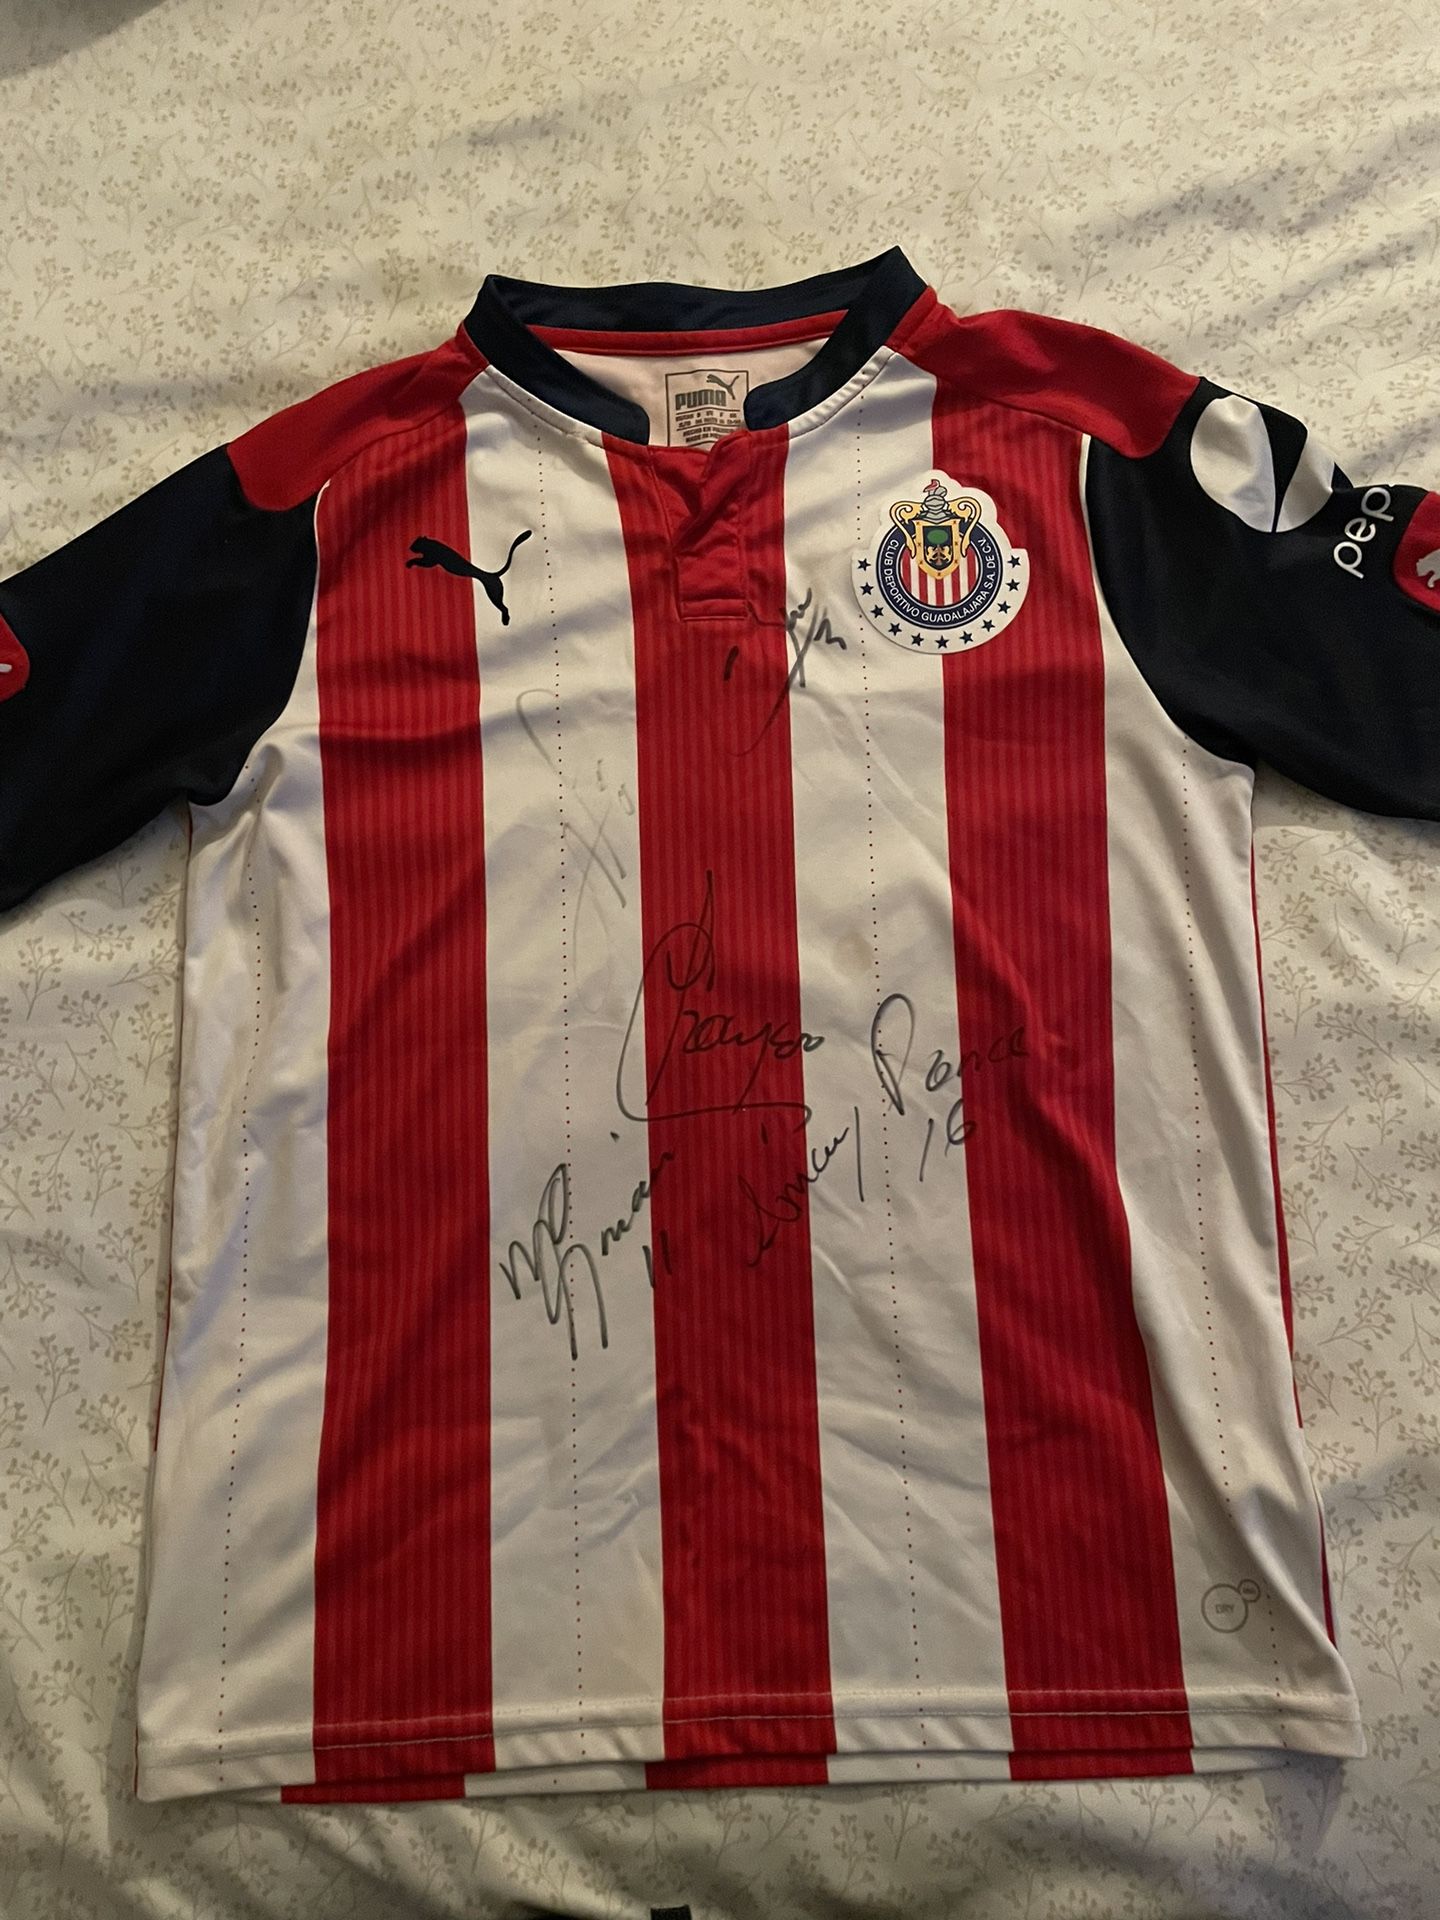 Chivas Signed Jersey Size: Youth Large 